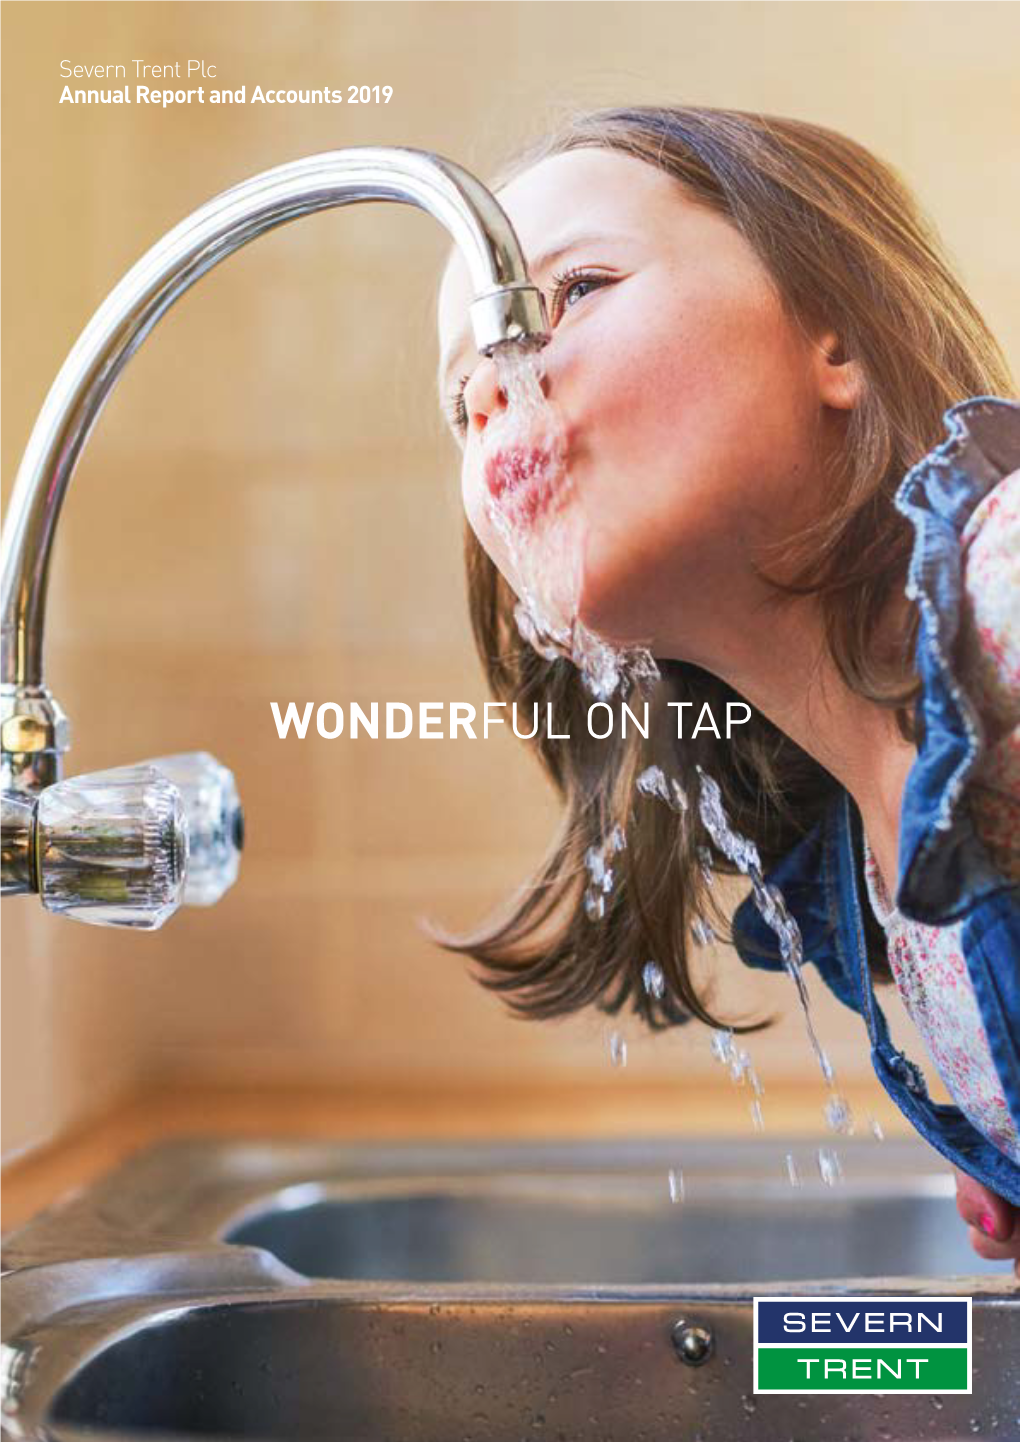 Severn Trent Plc Annual Report and Accounts 2019 Highlights Contents